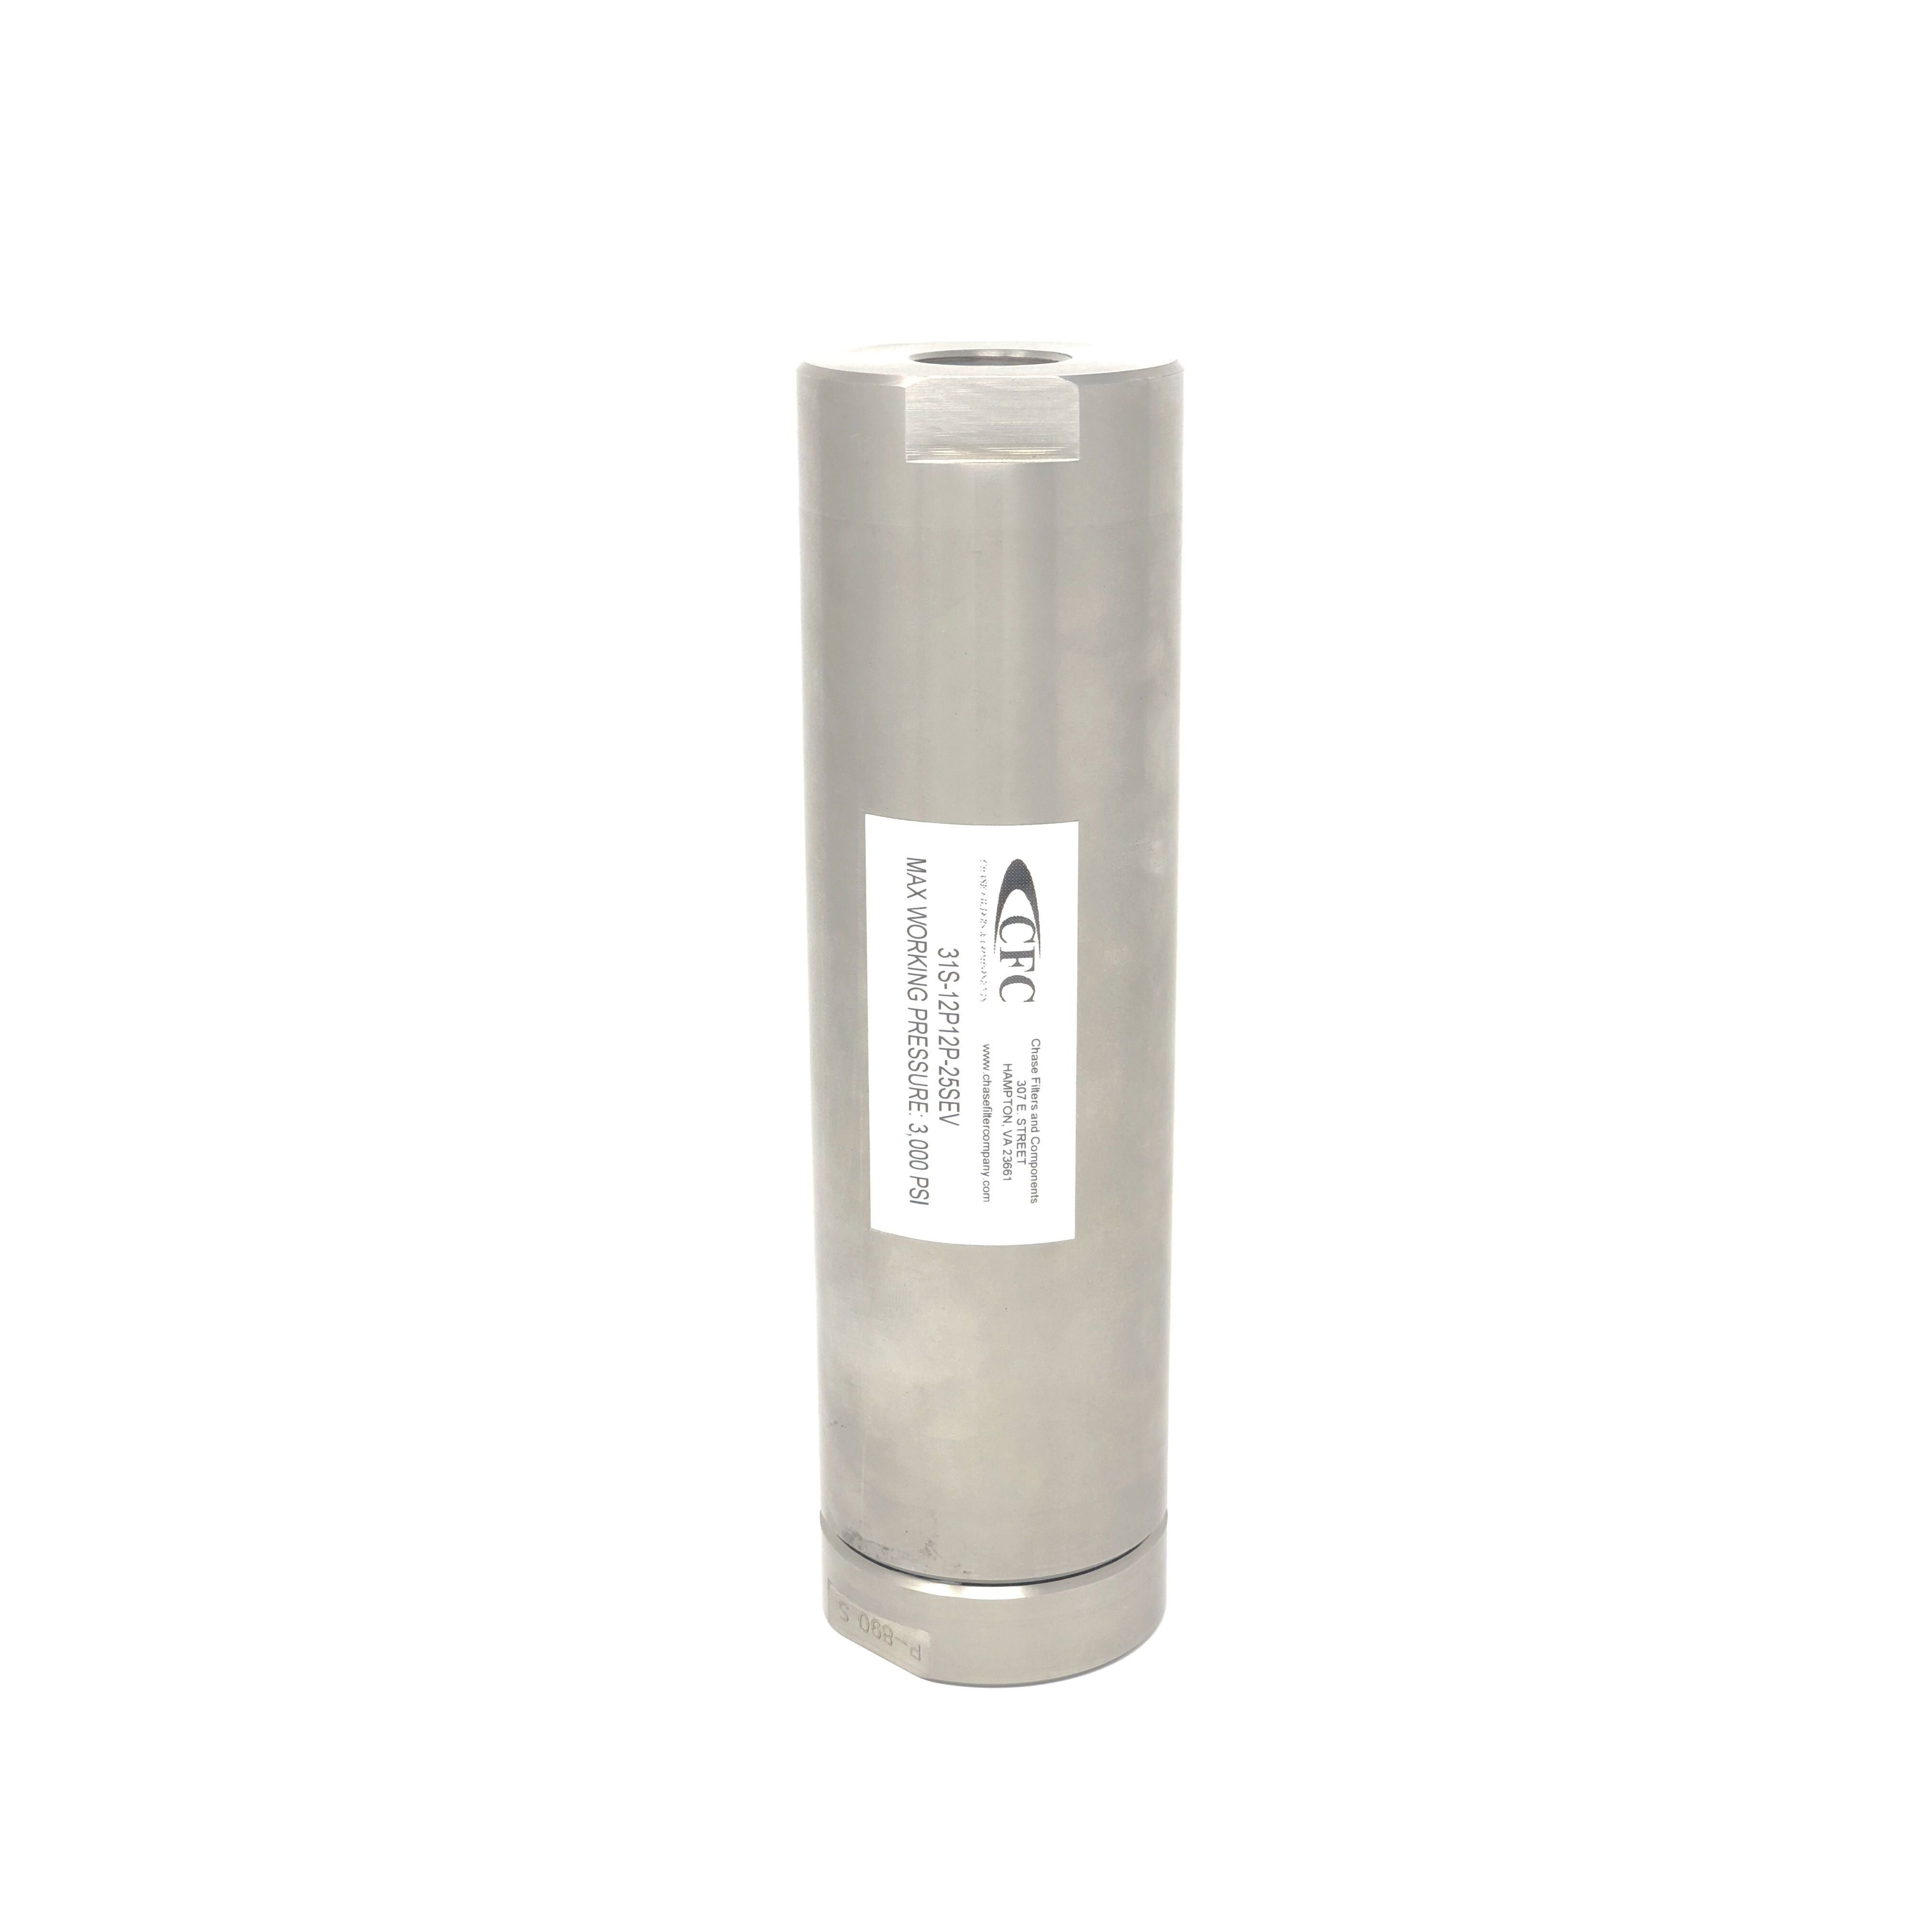 31P-16P16P-25SN : Chase High Pressure Inline Filter, 6000psi, 1" NPT, 25 Micron, No Visual Indicator, No Bypass